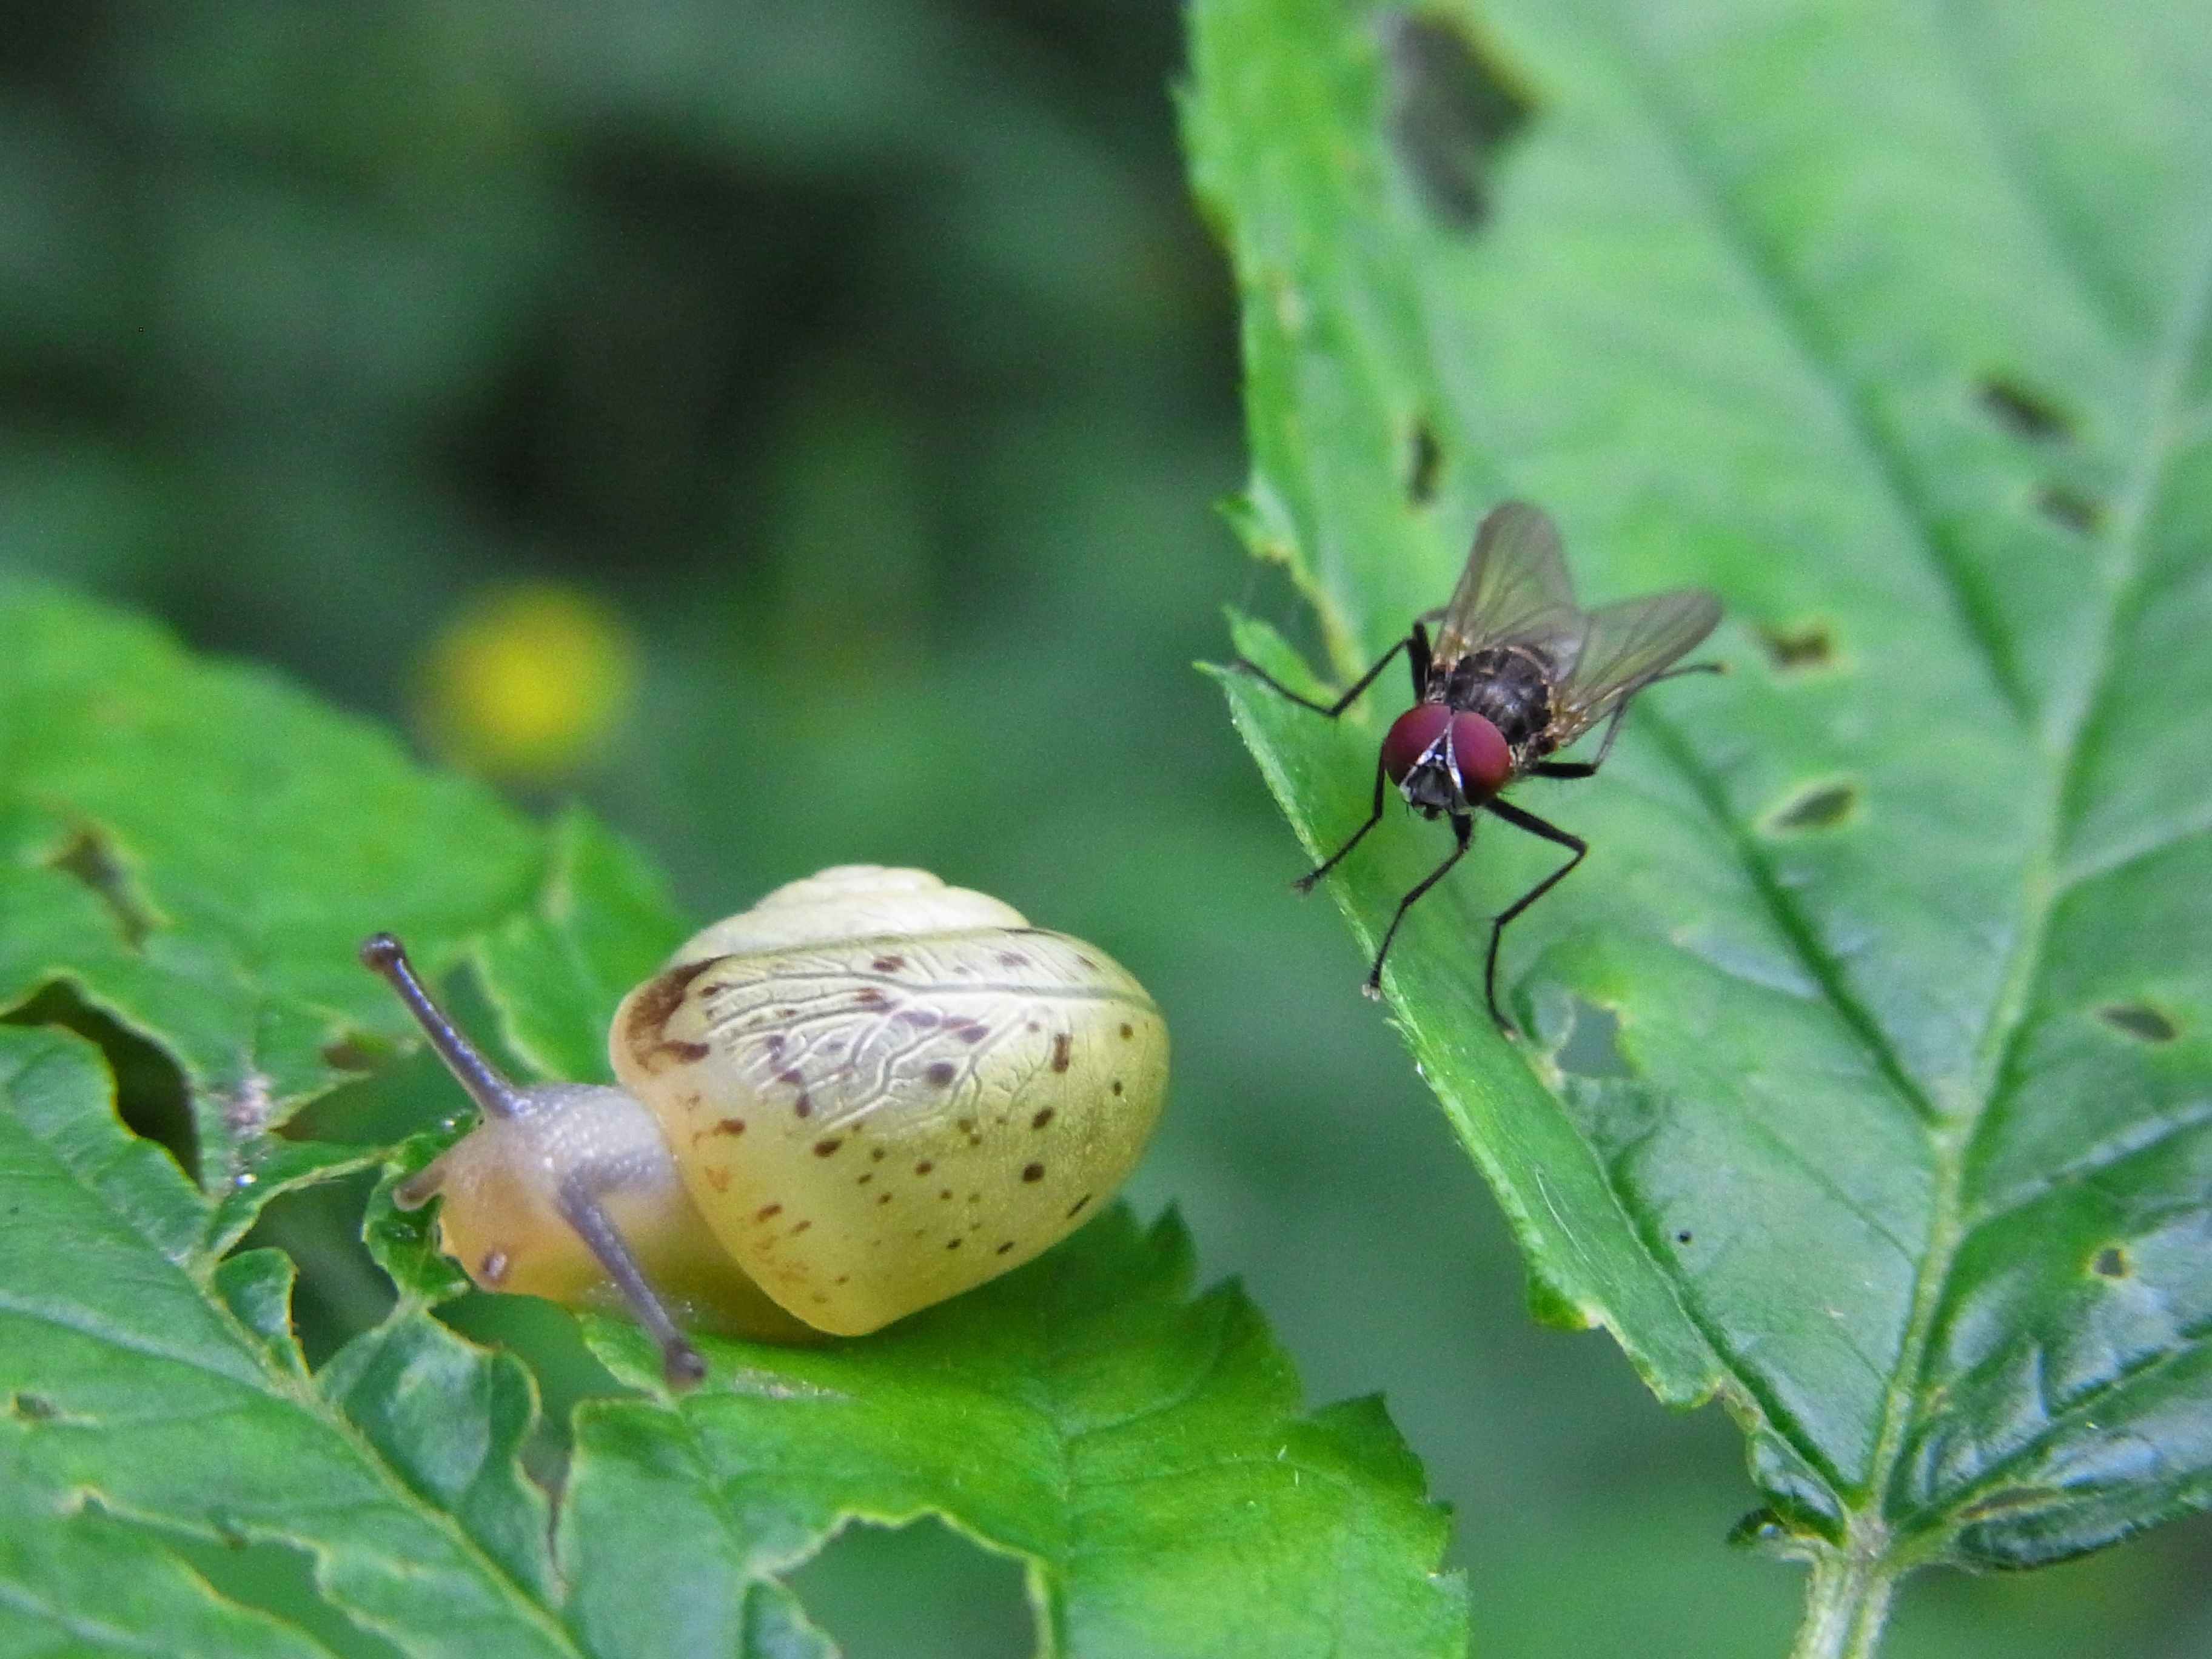 common house fly and yellow snail